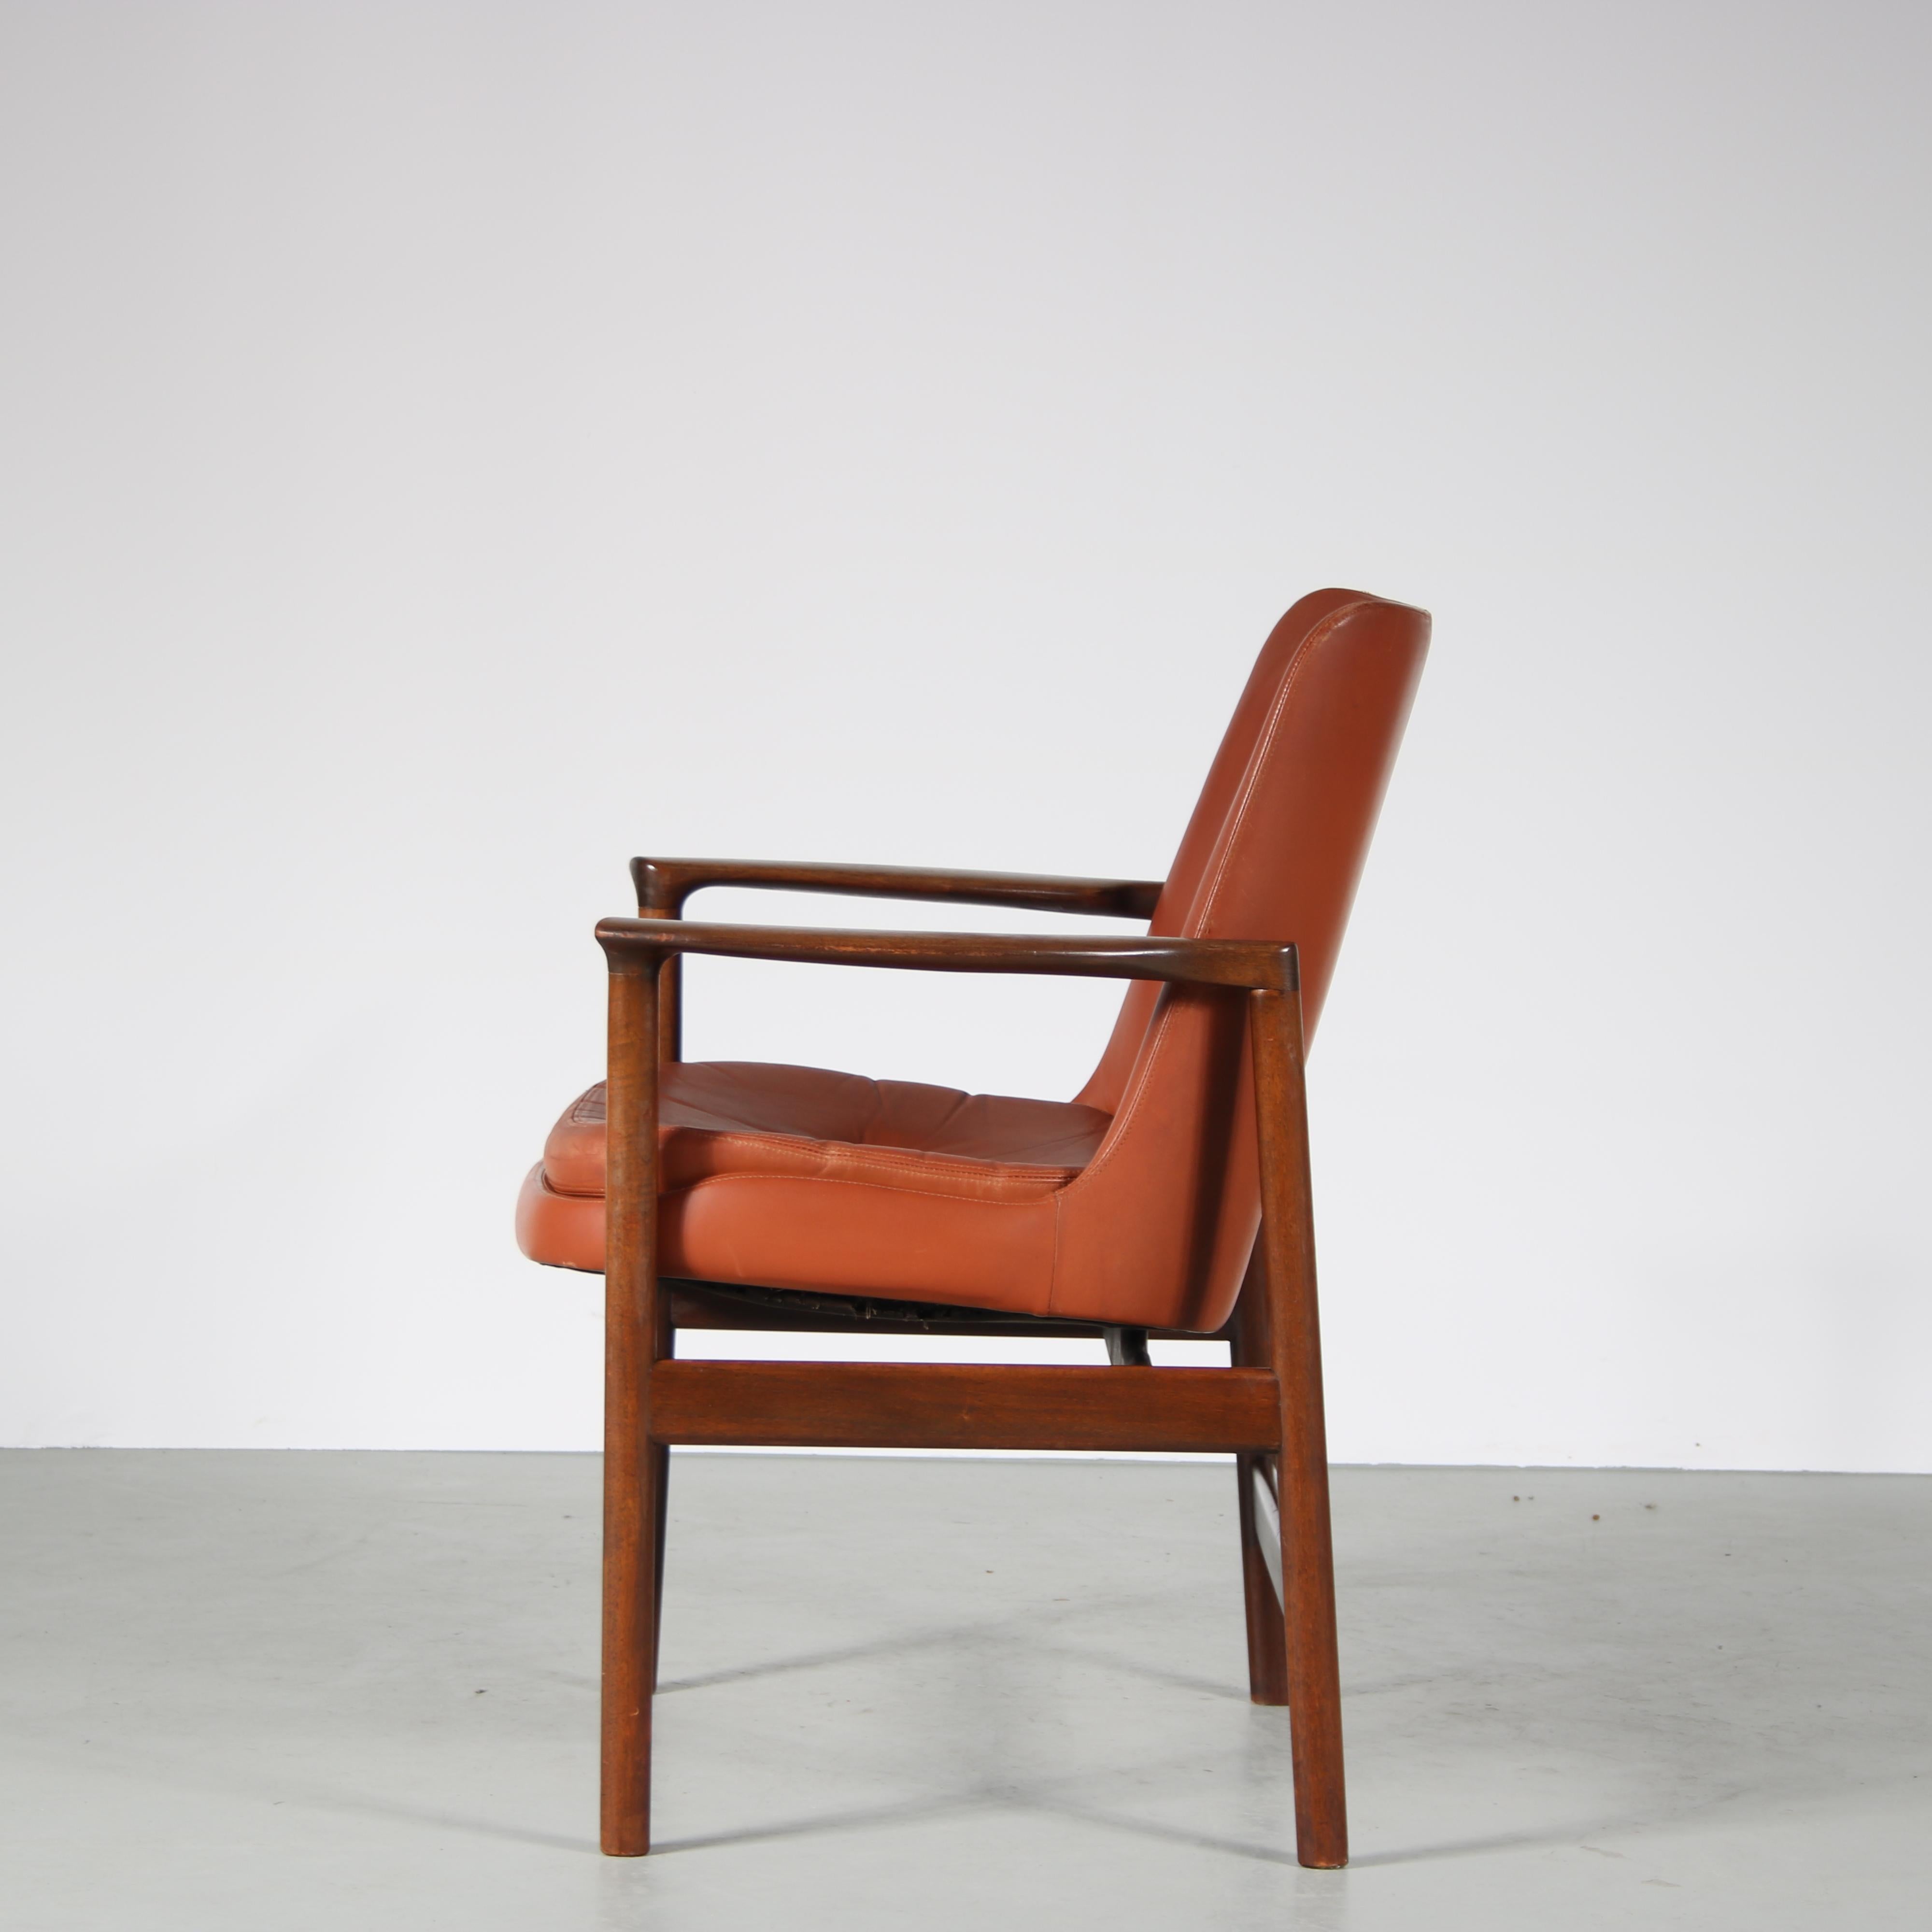 Mid-20th Century Side Chair by Ib Kofod Larsen for Fröschen Sitform, Germany, 1960